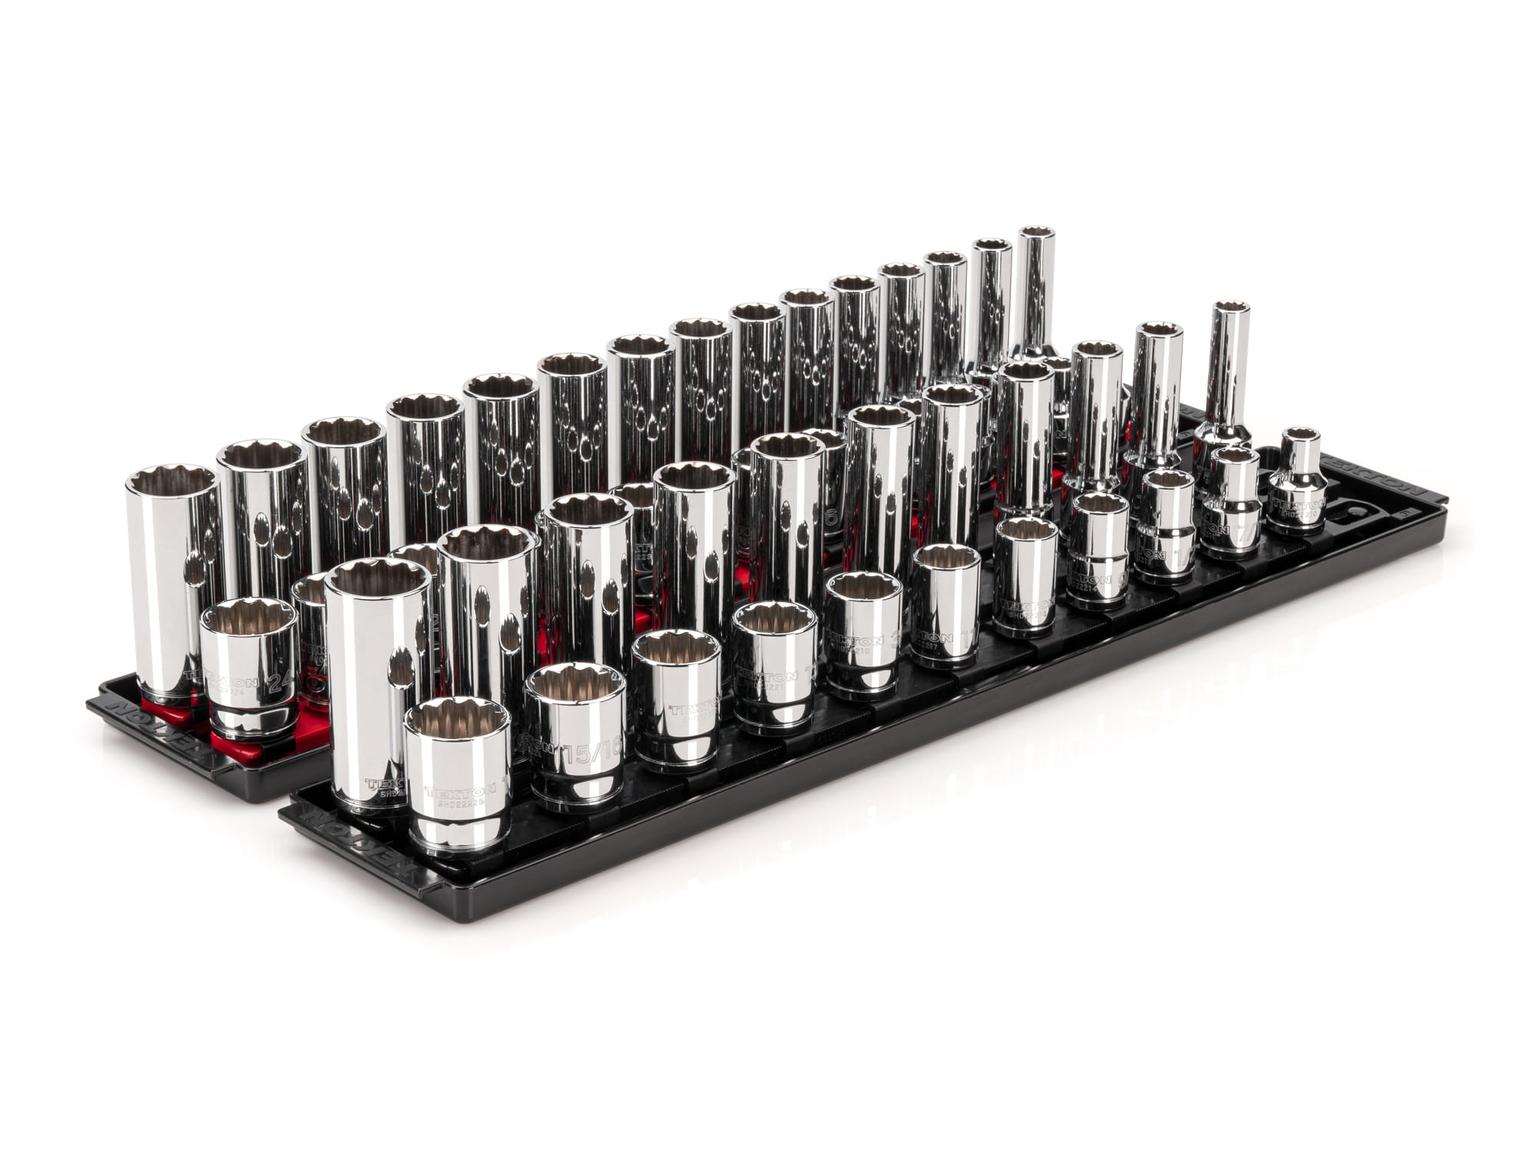 TEKTON SHD92214-T 1/2 Inch Drive 12-Point Socket Set with Rails, 52-Piece (3/8-1 in., 10-24 mm)